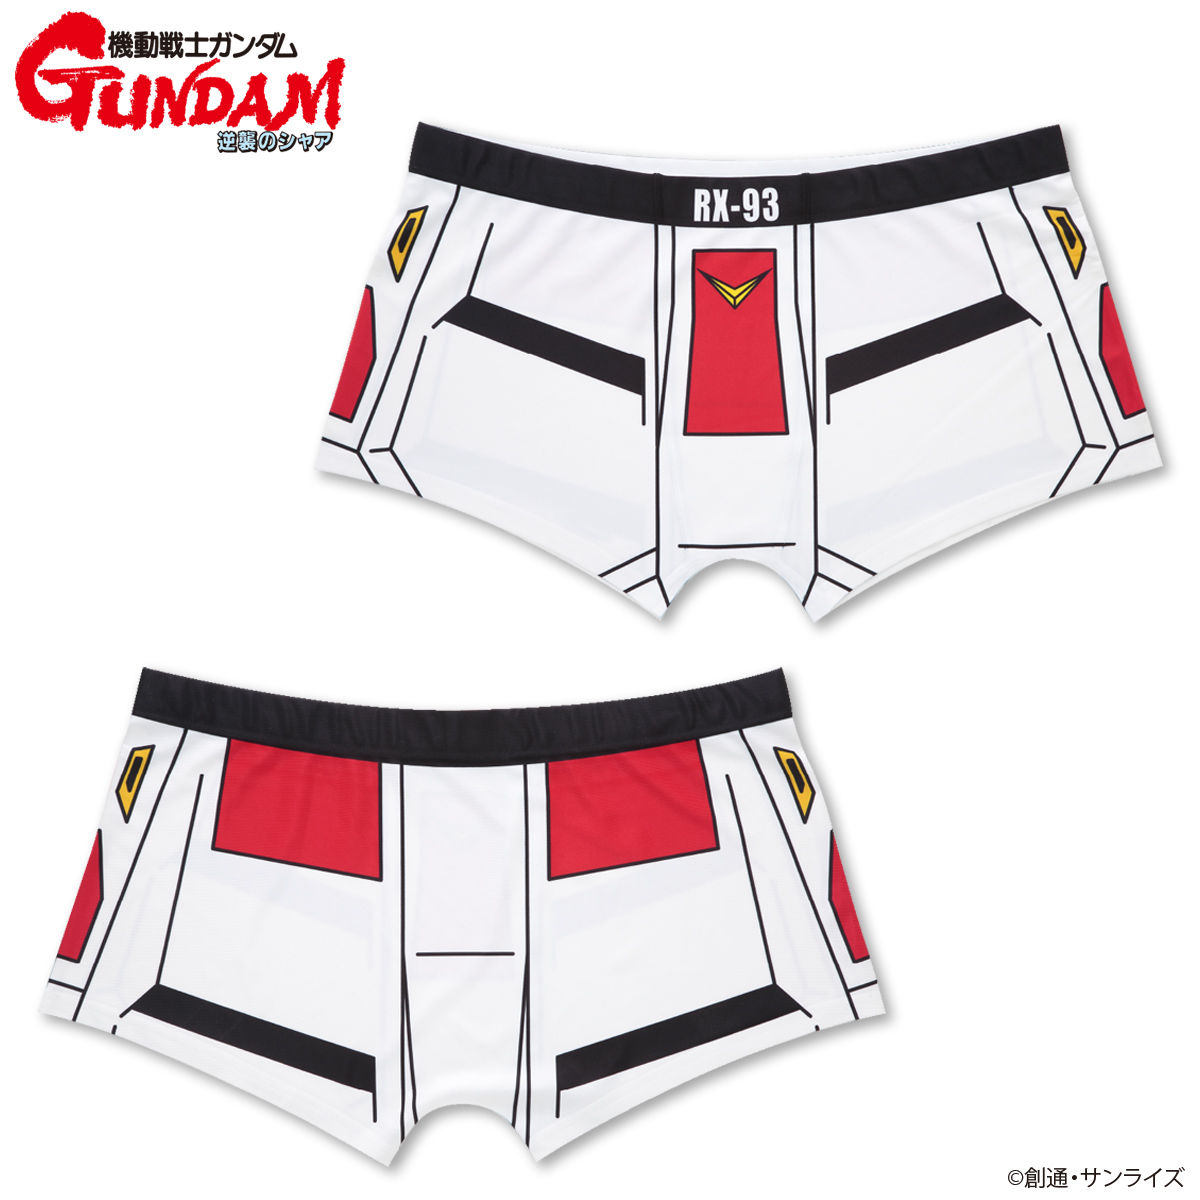 Mobile Suit Gundam Char's Counterattack Mobile Suit Boxers